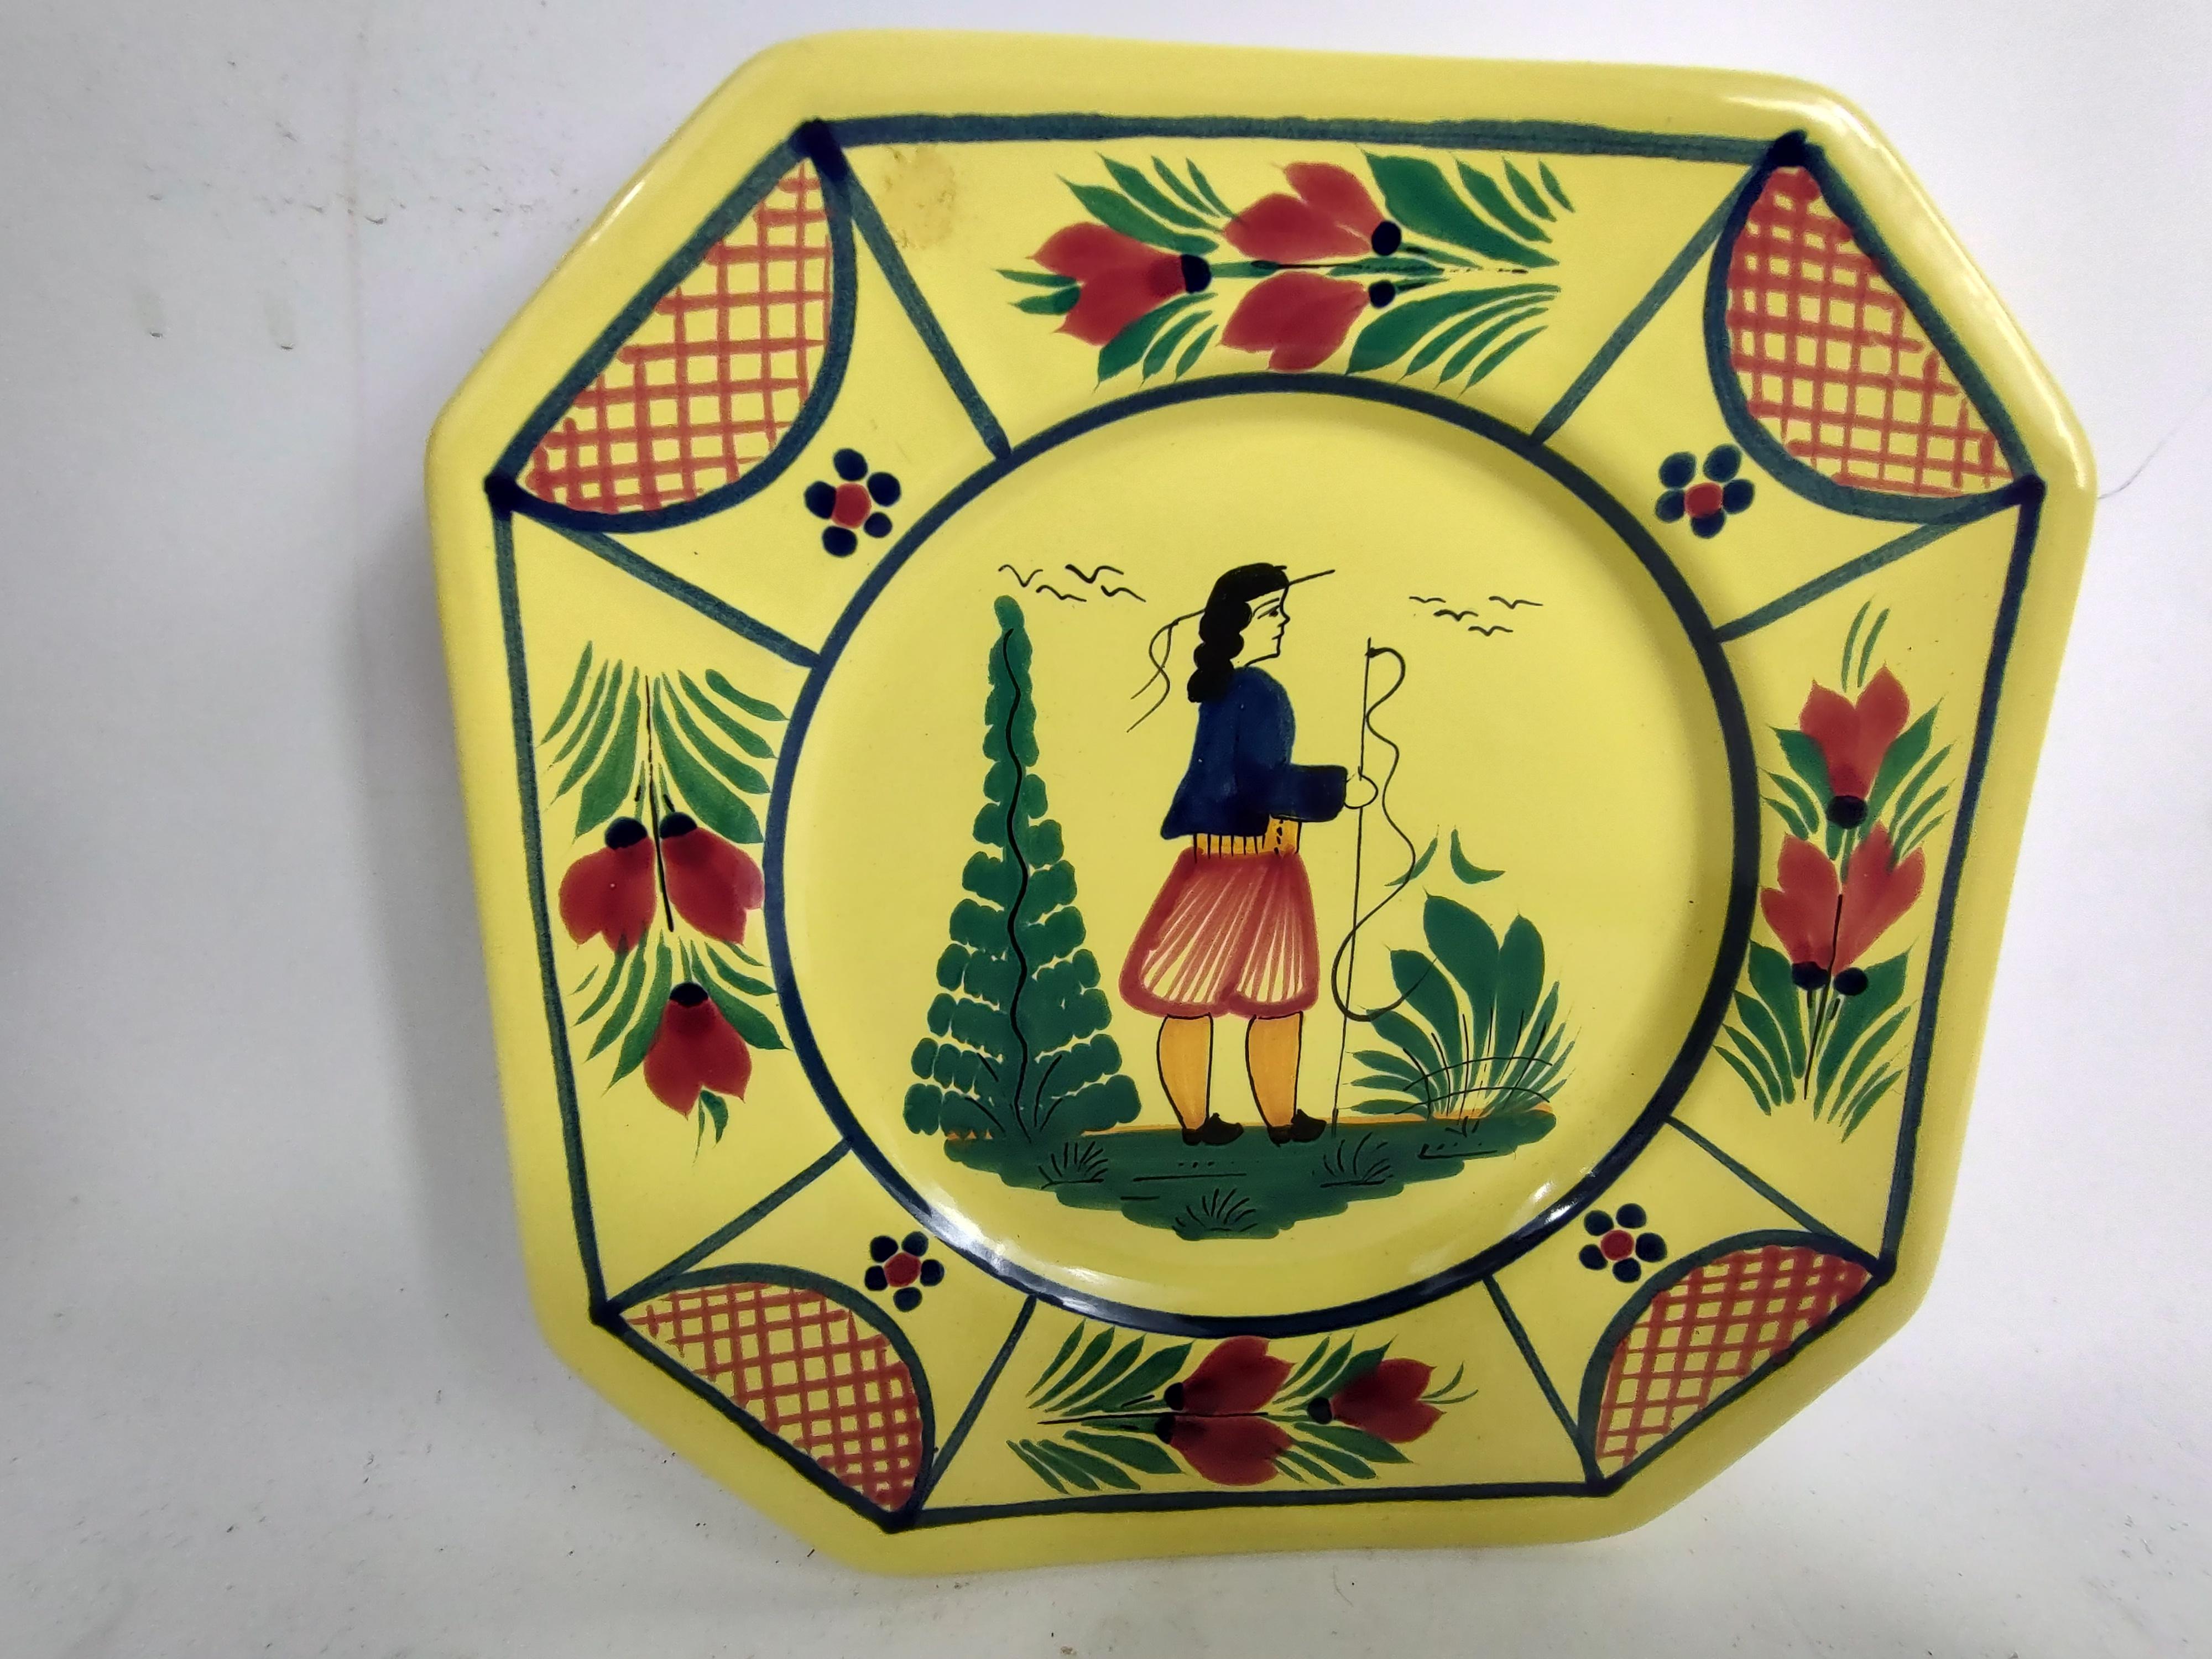 Fabulous set of 4 lunch plates with yellow glaze and 2 pairs of the Breton peasant men and women. Hardly used and shows no wear. In excellent vintage condition. Can be parcel posted. More pieces to follow.